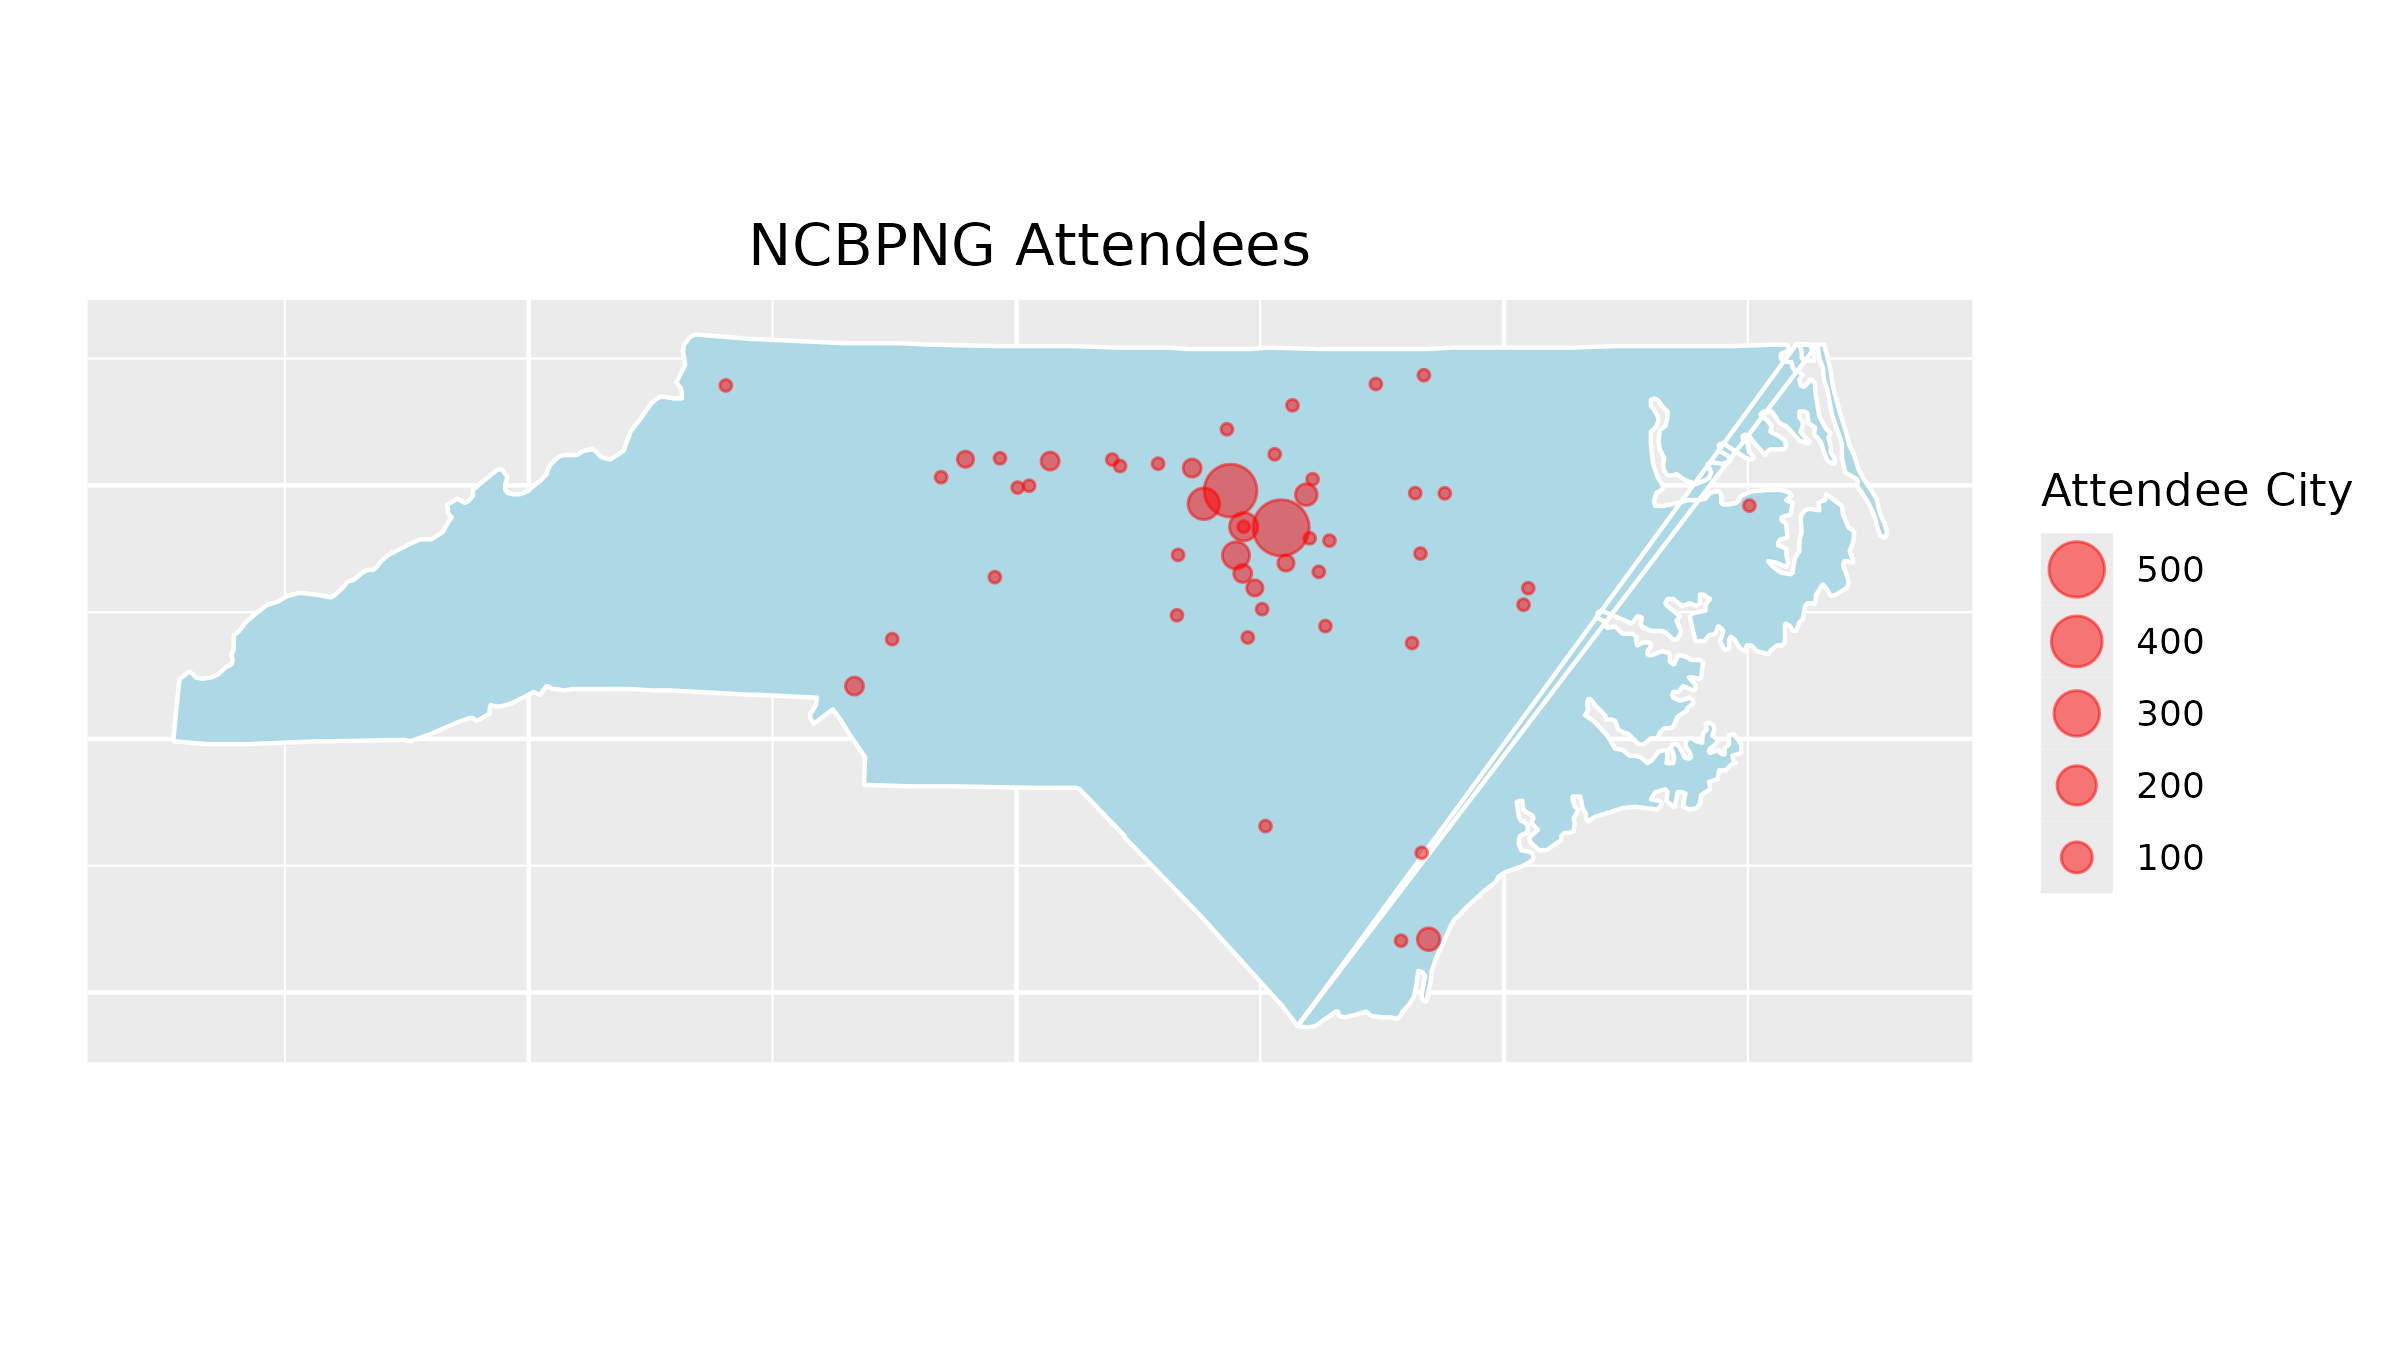 Where NCBPNG Attendees have come from